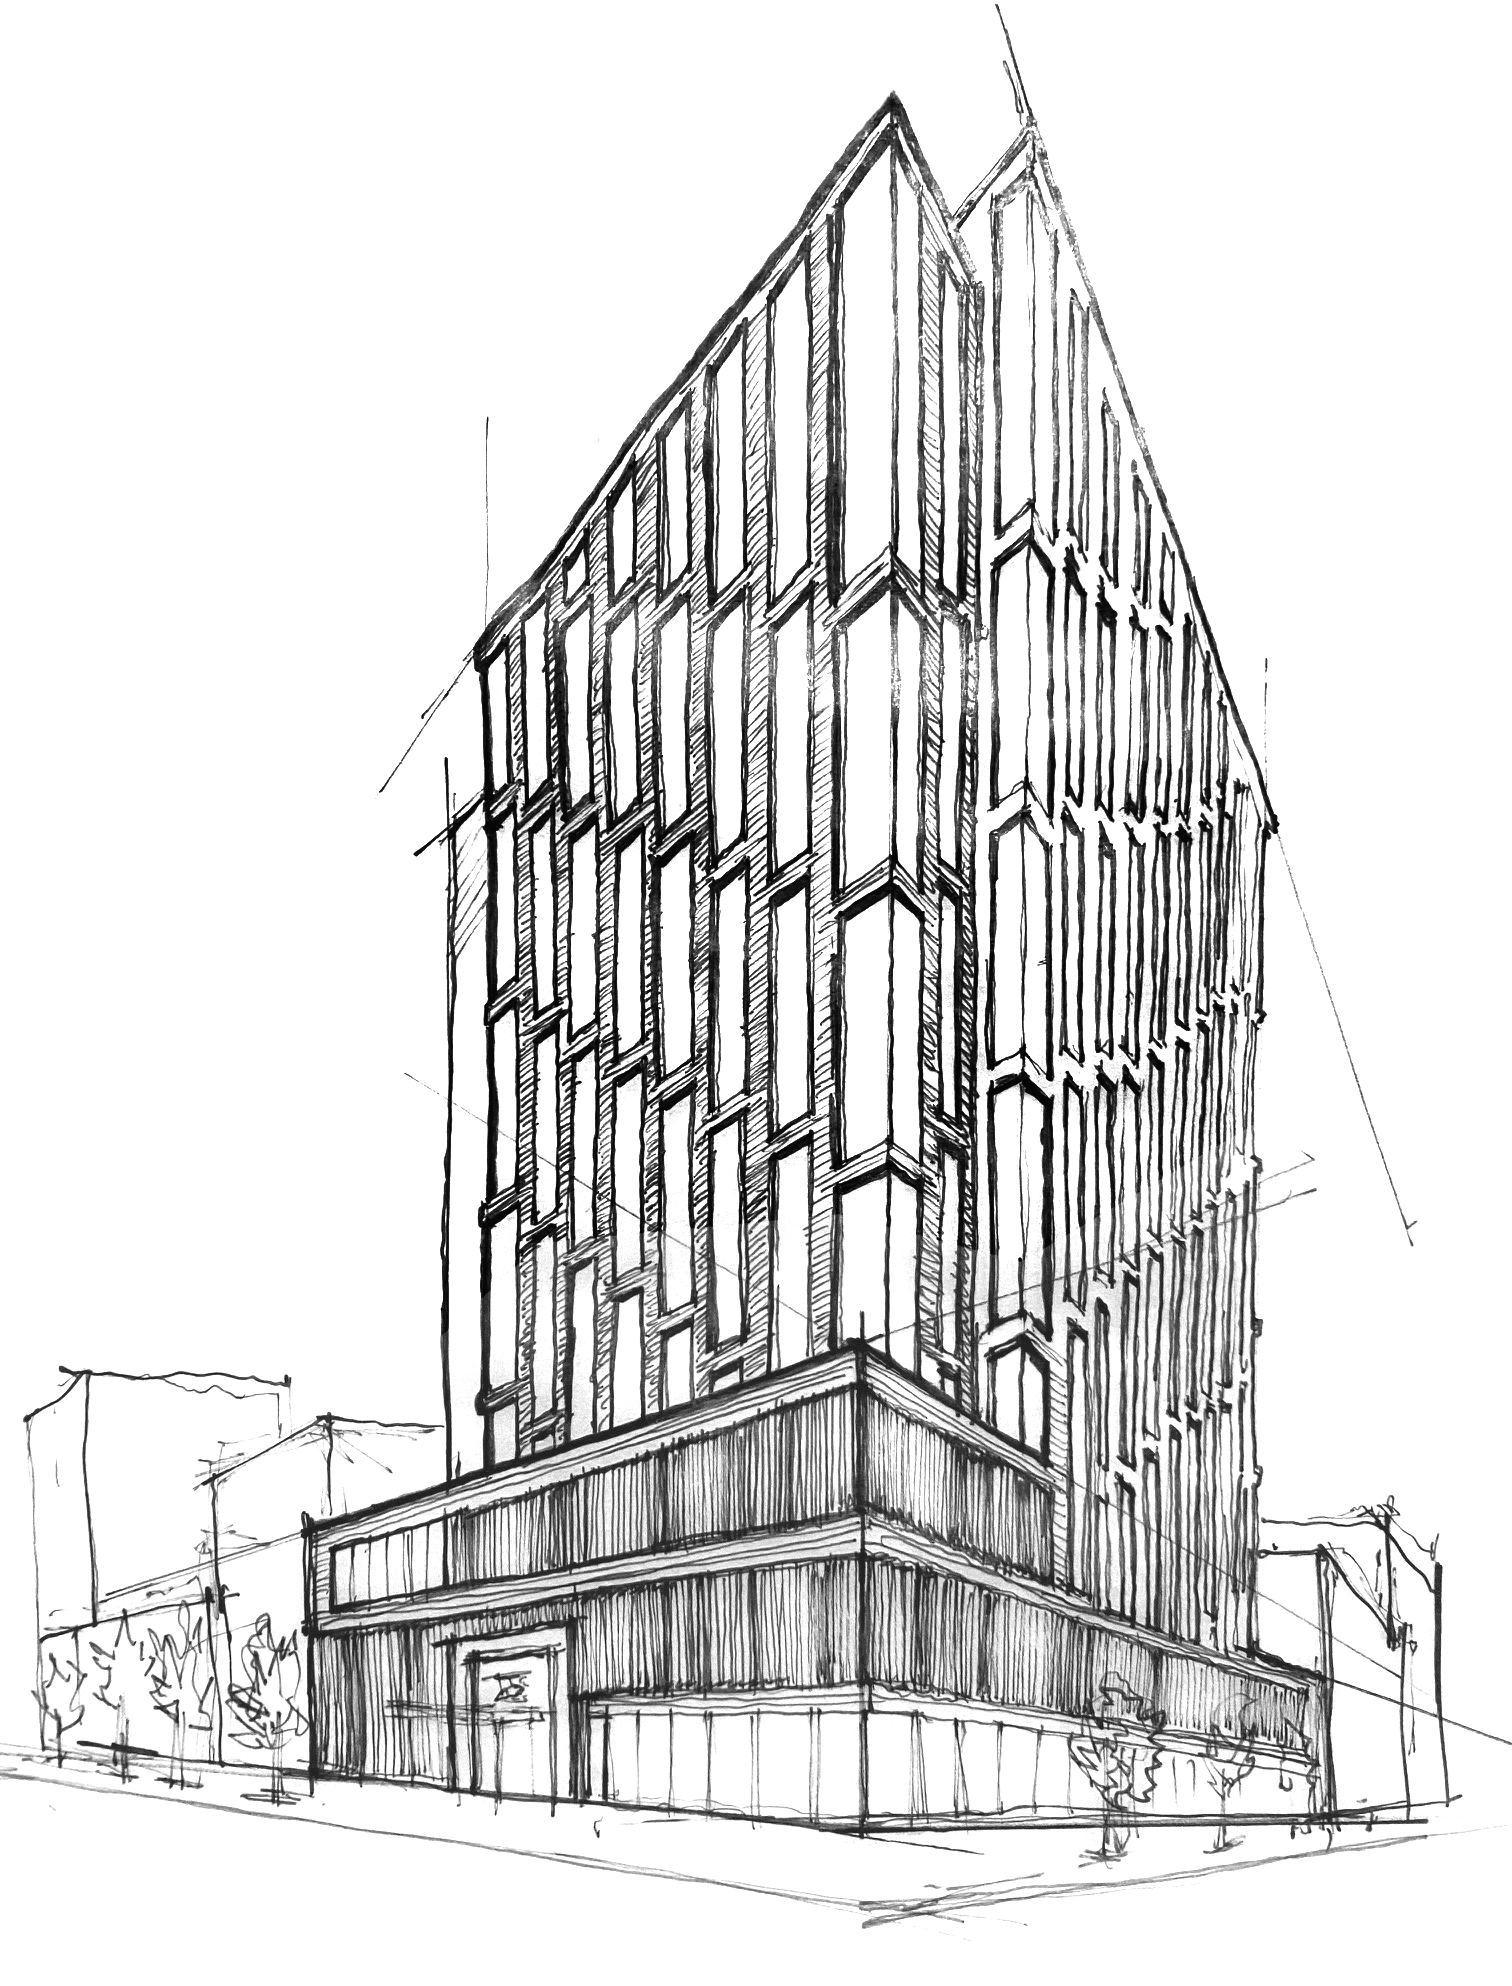 black and white sketch line drawing of building from exterior